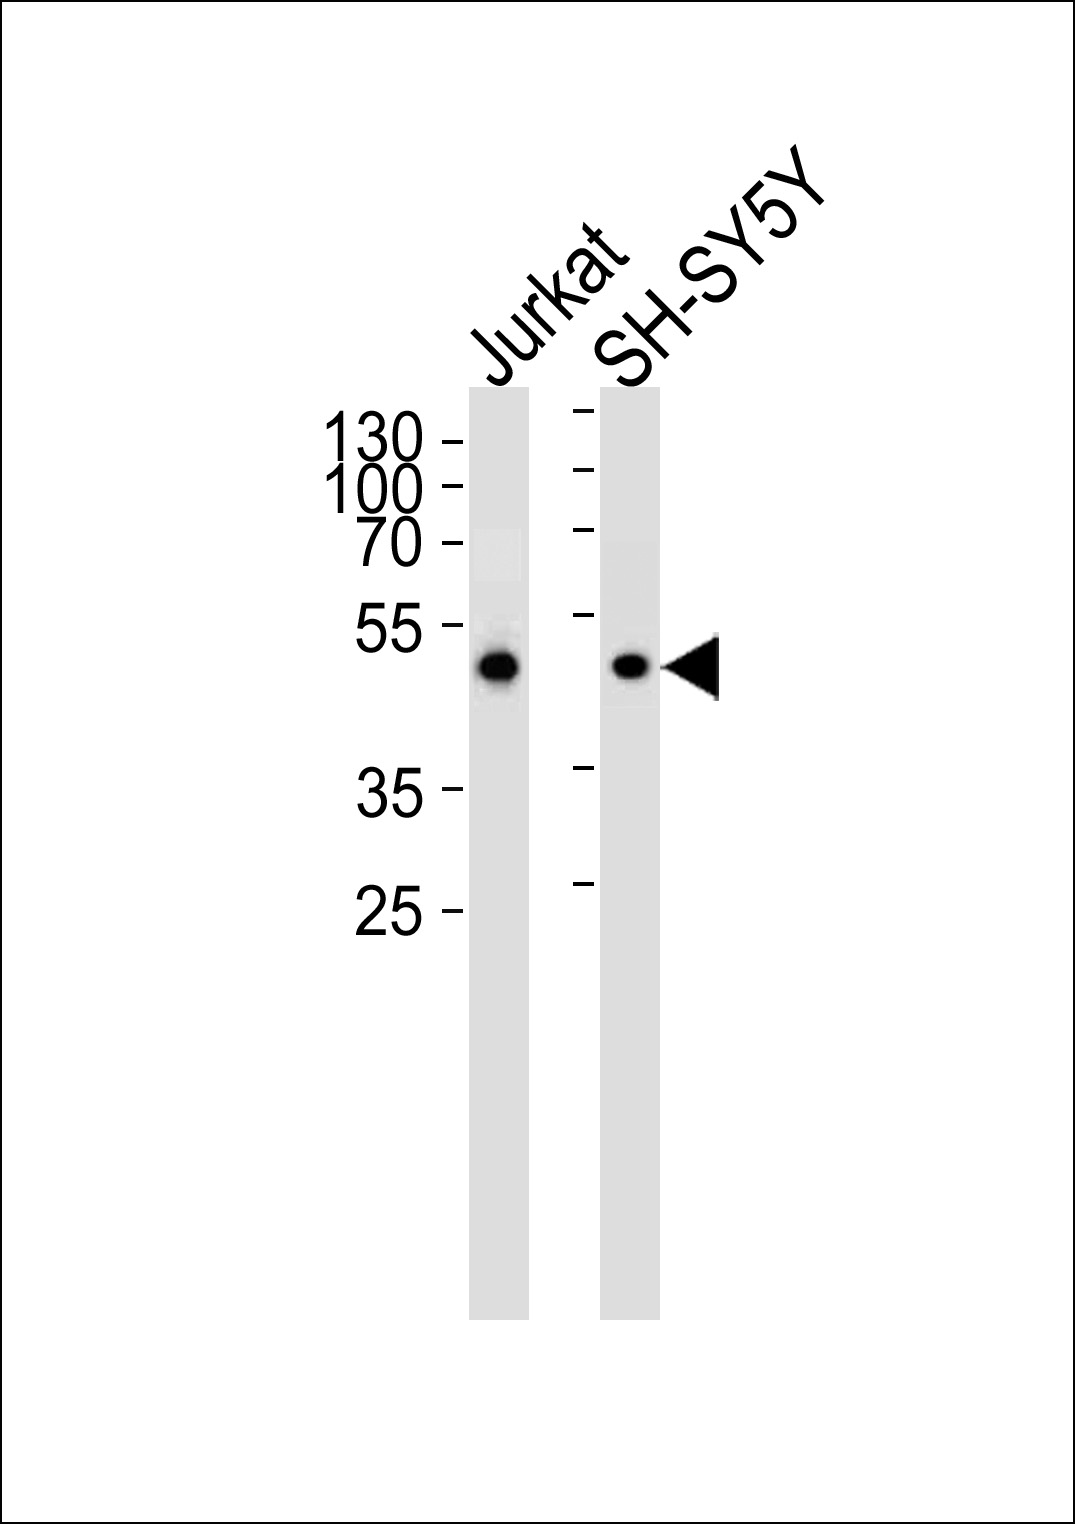 ANXA7 Antibody (Center) (Cat.# AP8738c) western blot analysis in Jurkat and SH-SY5Y cell lysates (35ug/lane). This demonstrates that the ANXA7 antibody detected ANXA7 protein (arrow).